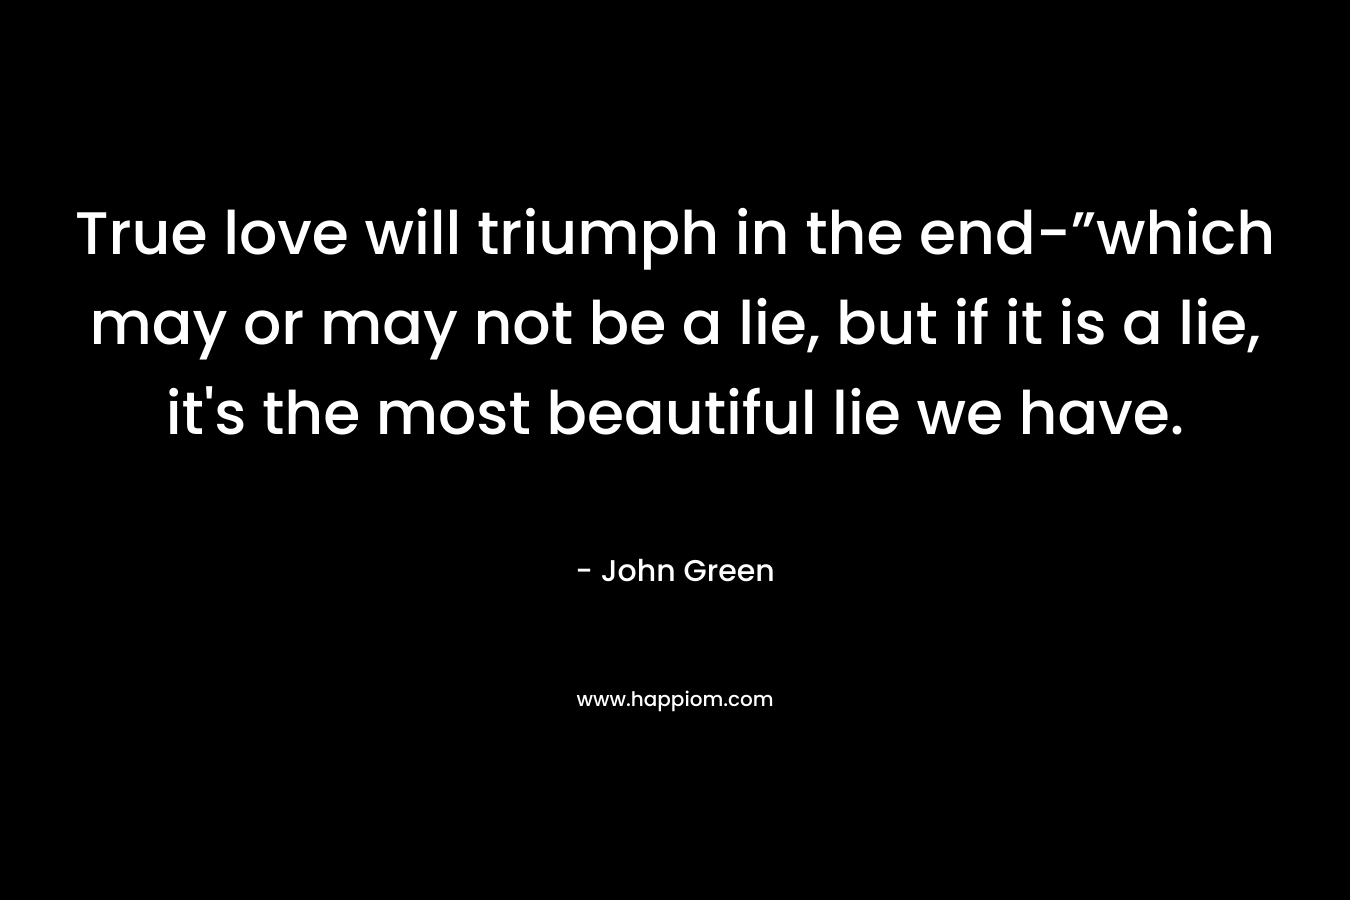 True love will triumph in the end-”which may or may not be a lie, but if it is a lie, it's the most beautiful lie we have.